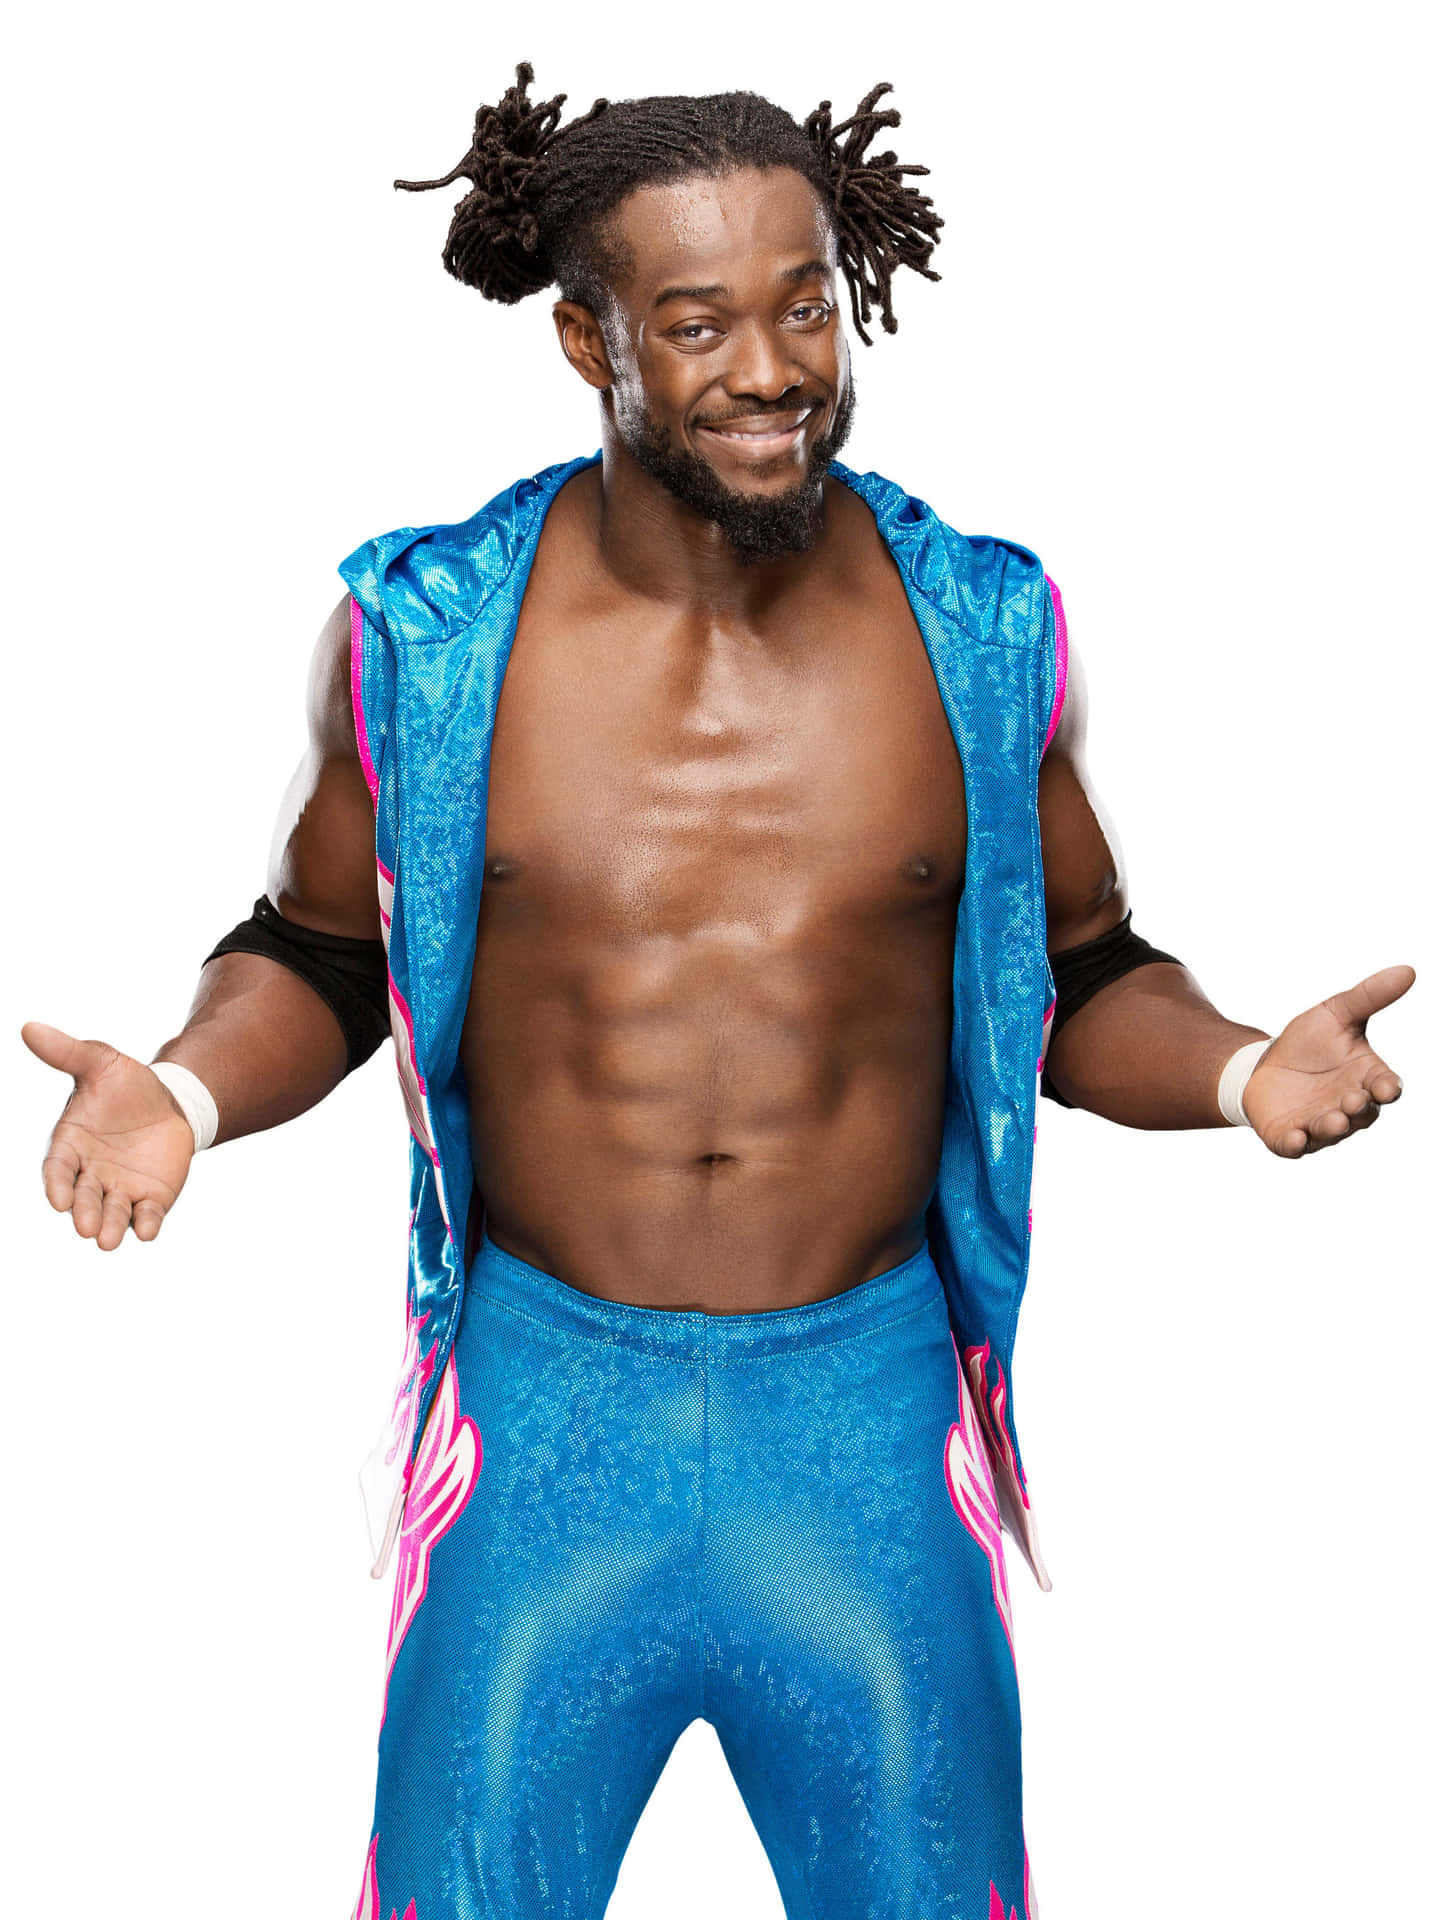 Kofi Kingston In Blue And Pink Wrestling Tights Picture